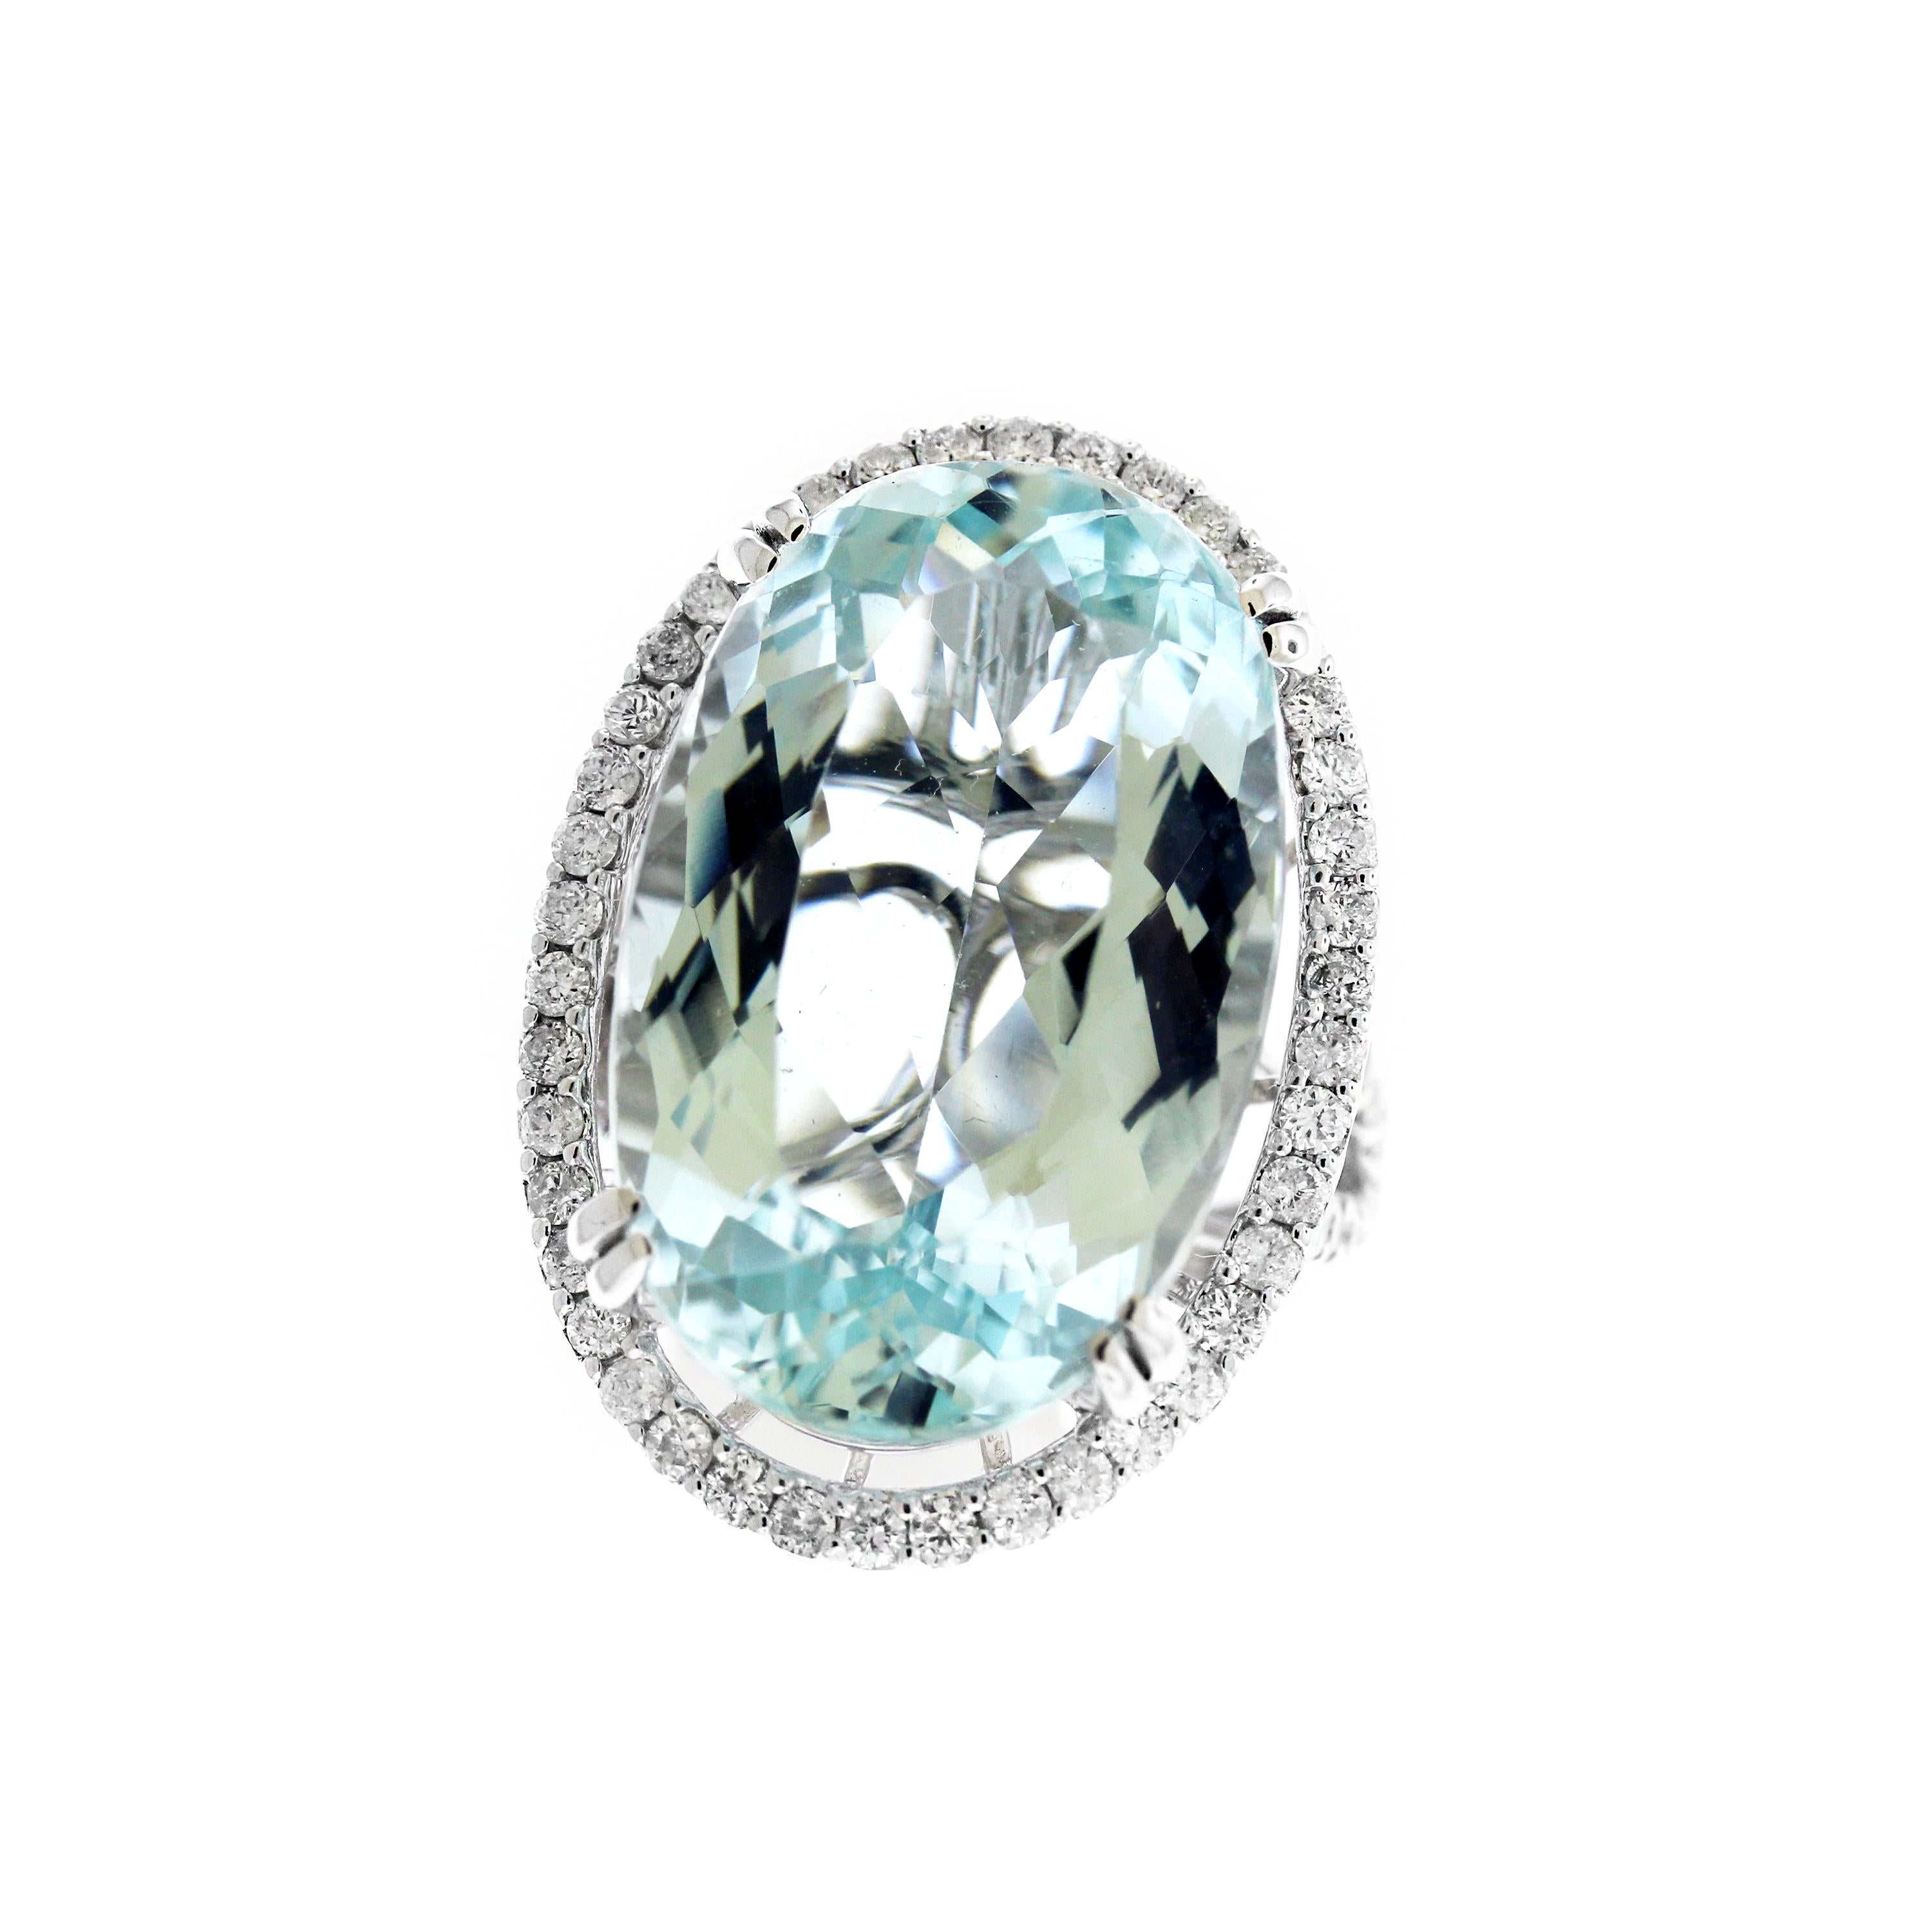 IF YOU ARE REALLY INTERESTED, CONTACT US WITH ANY REASONABLE OFFER. WE WILL TRY OUR BEST TO MAKE YOU HAPPY!

14K White Gold and White Diamond Ring with Oval Cut Aquamarine Center

26.20 carat oval cut Aquamarine center 

1.30 carat G color, VS